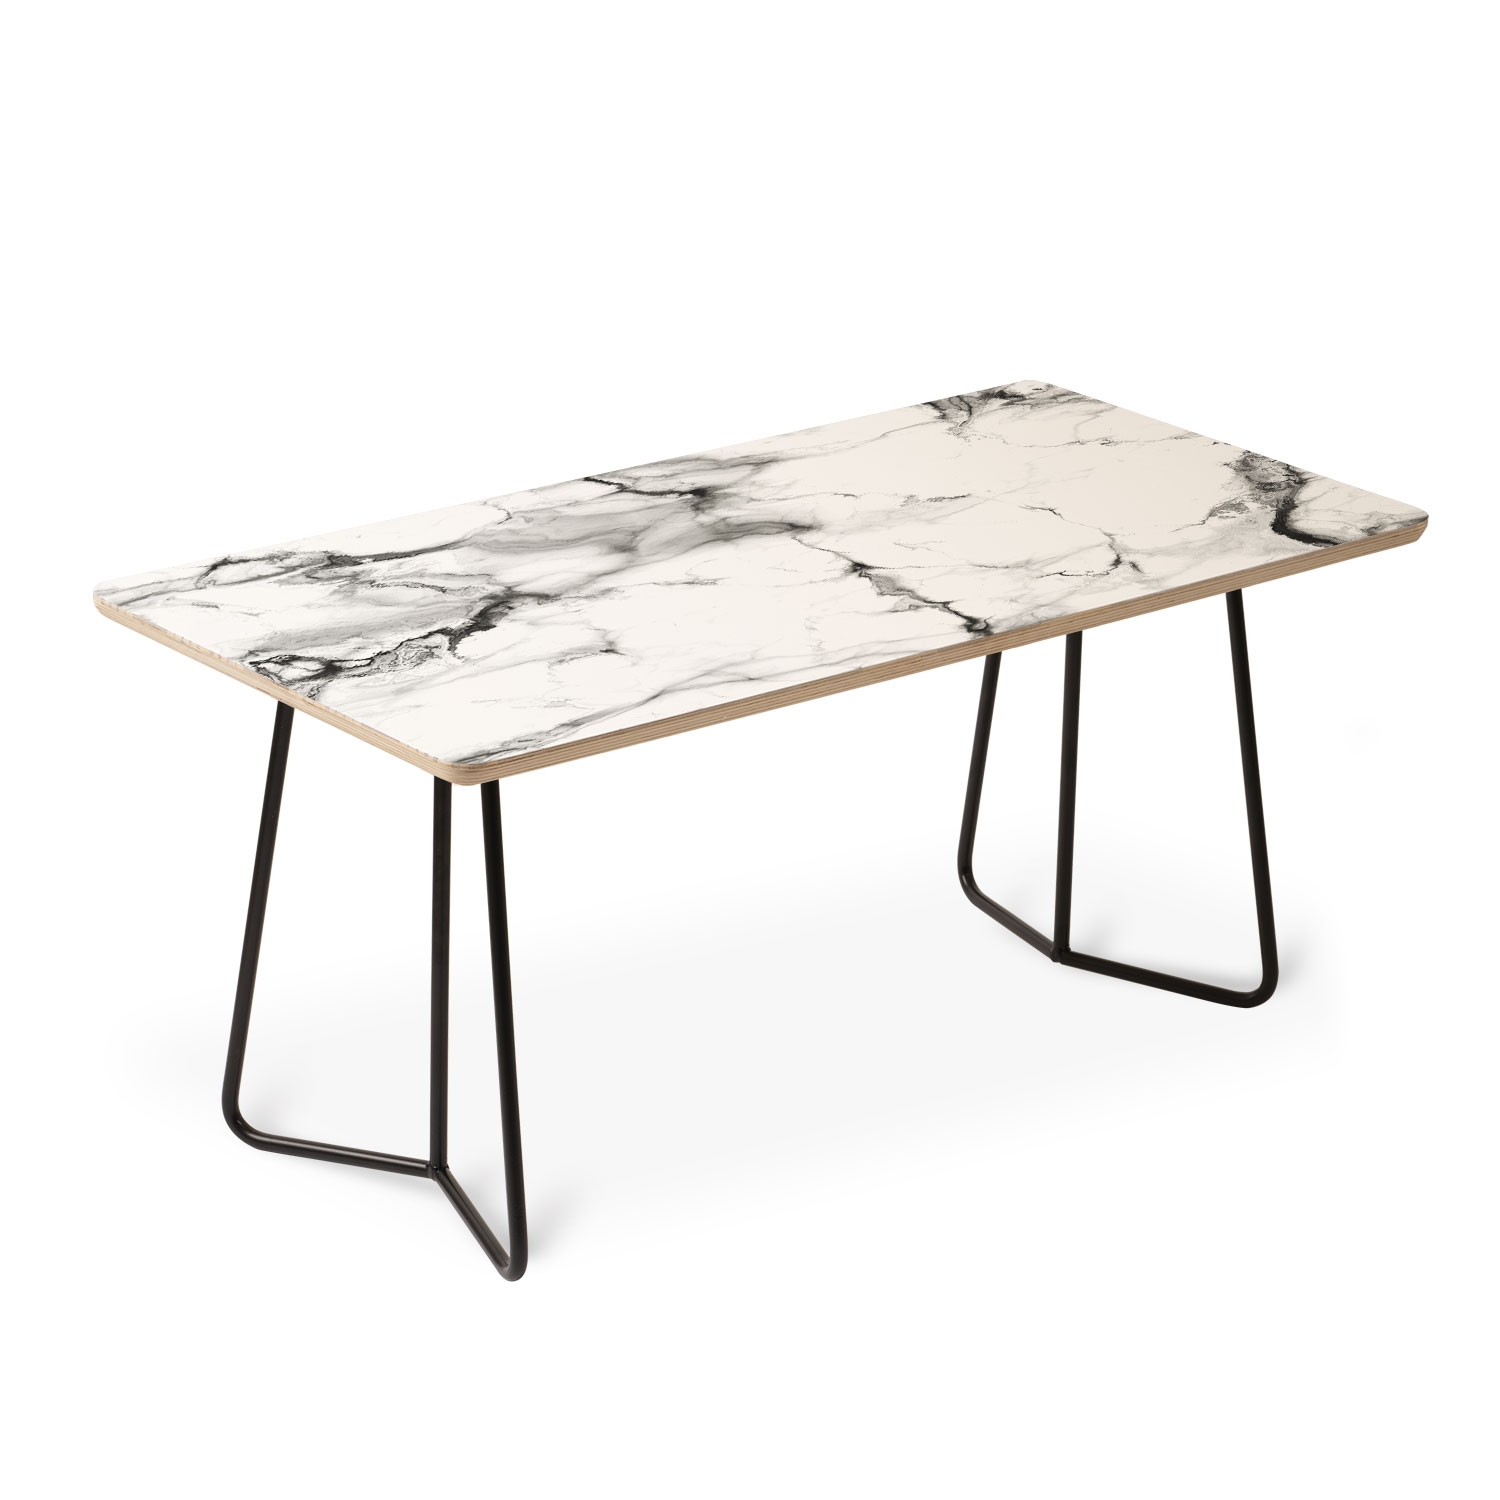 Marble by Chelsea Victoria - Coffee Table Black Aston Legs - Image 3